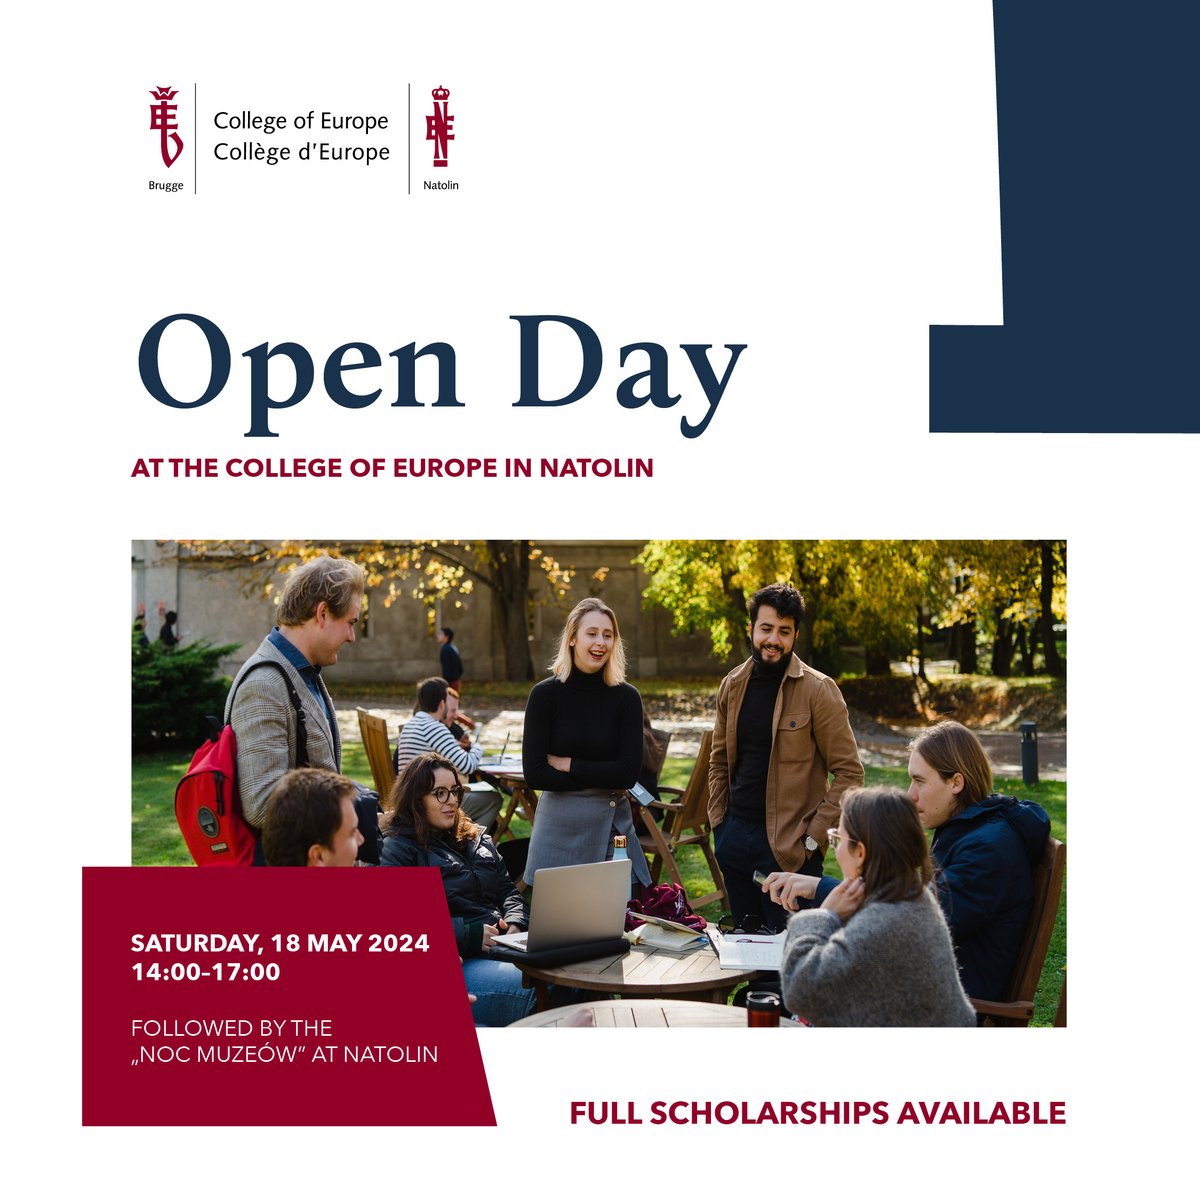 Wersja polska poniżej Join us at our Open Day on Saturday, 18 May 2024! The College of Europe in Natolin warmly invites all prospective students to come and learn about our academic offer, recruitment procedure, generous scholarship programmes, and discover our beautiful